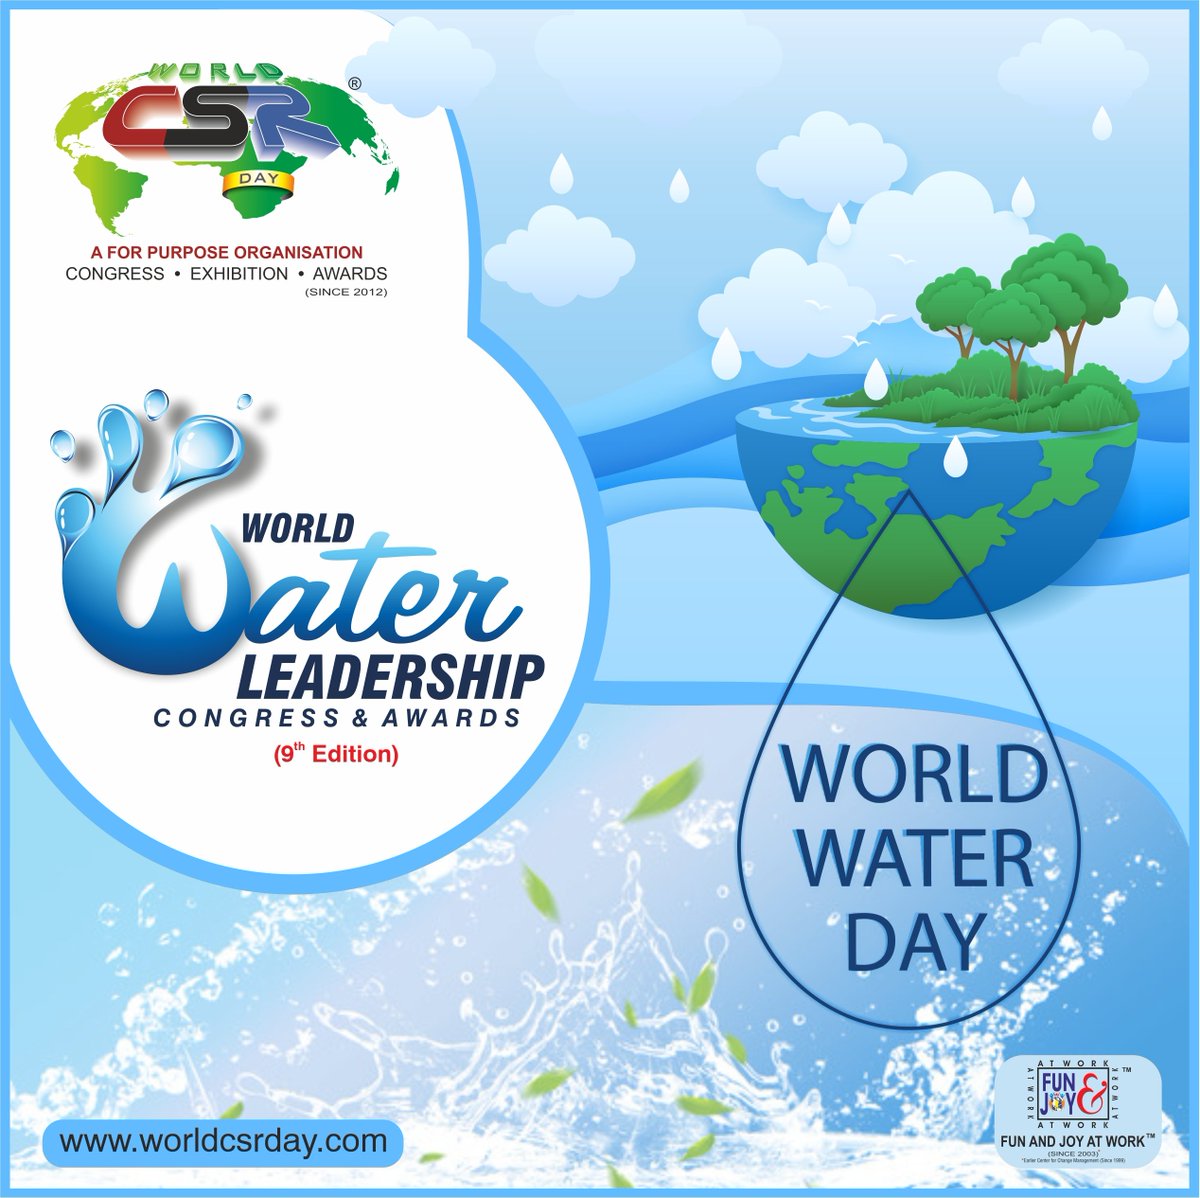 Happy World Water Day! 
.
.
May innovative solutions lead to sustainable water management practices.
#worldwaterday #water #climatechange #climate  #savewater #cleanwater #valuingwater #nature #wastewatertreatment #climatechangeequalswater #drinkingwater #waterislife